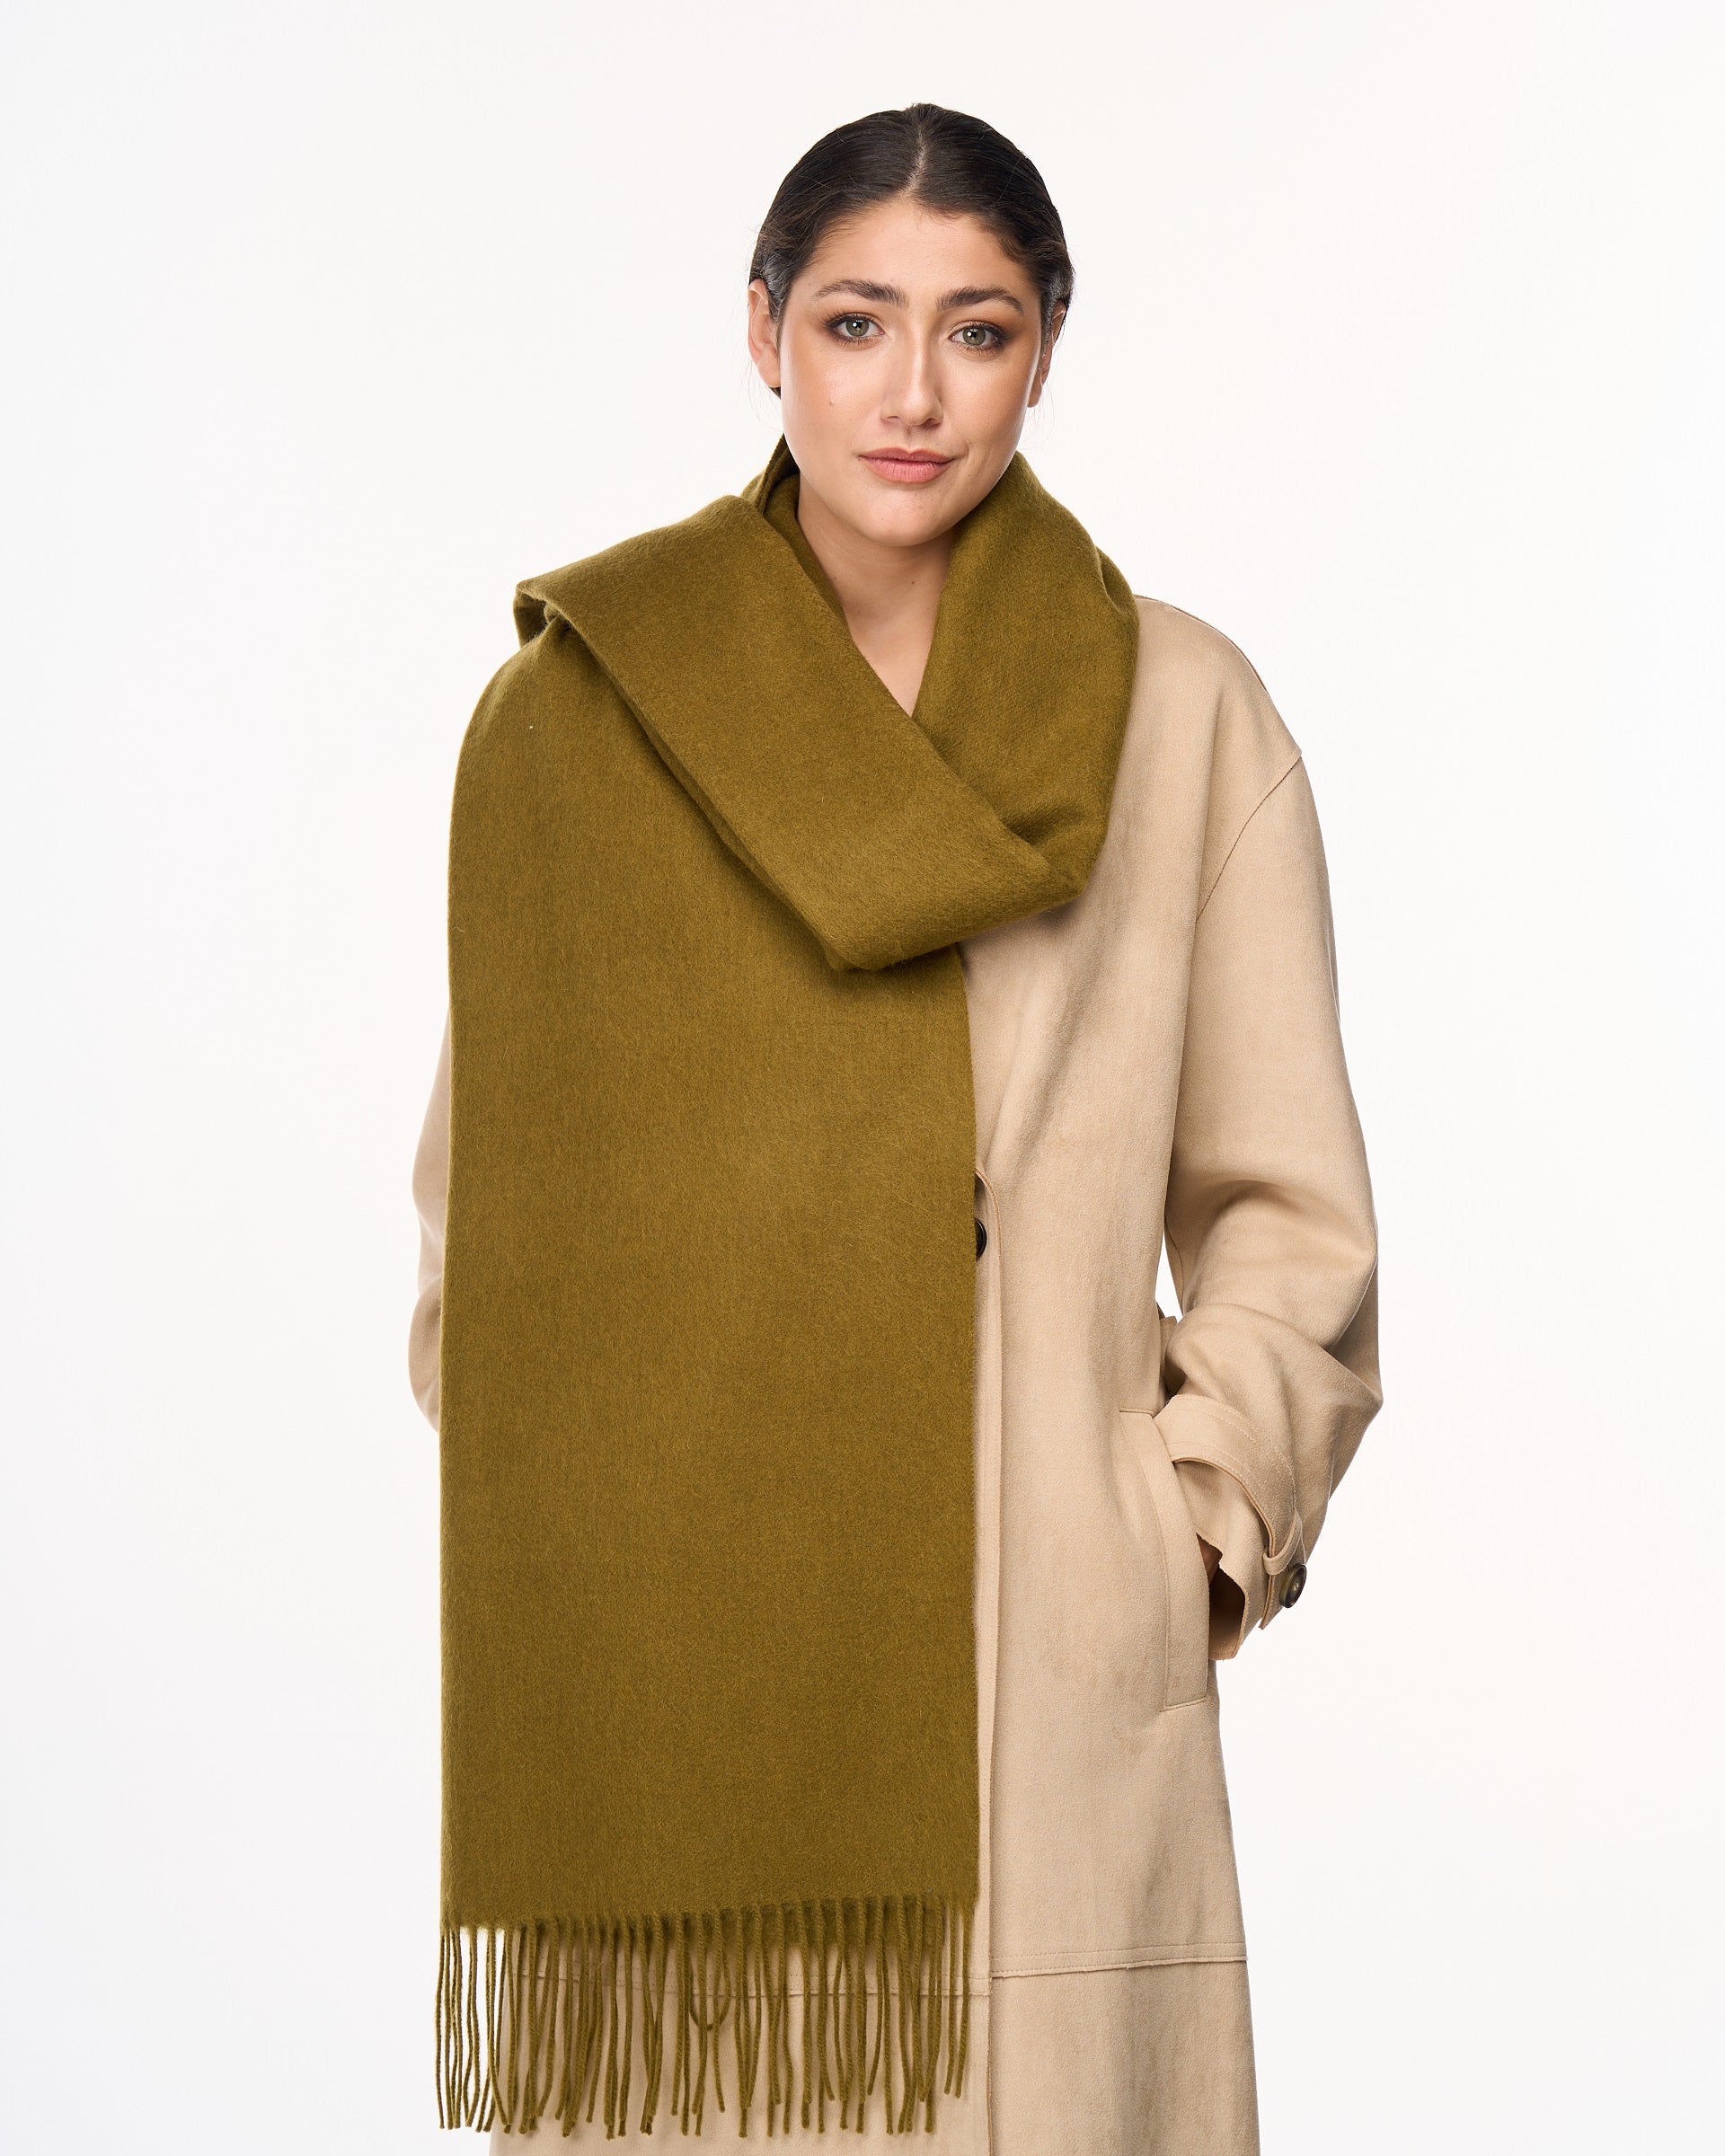 Woman’s Luxury Cashmere Scarves